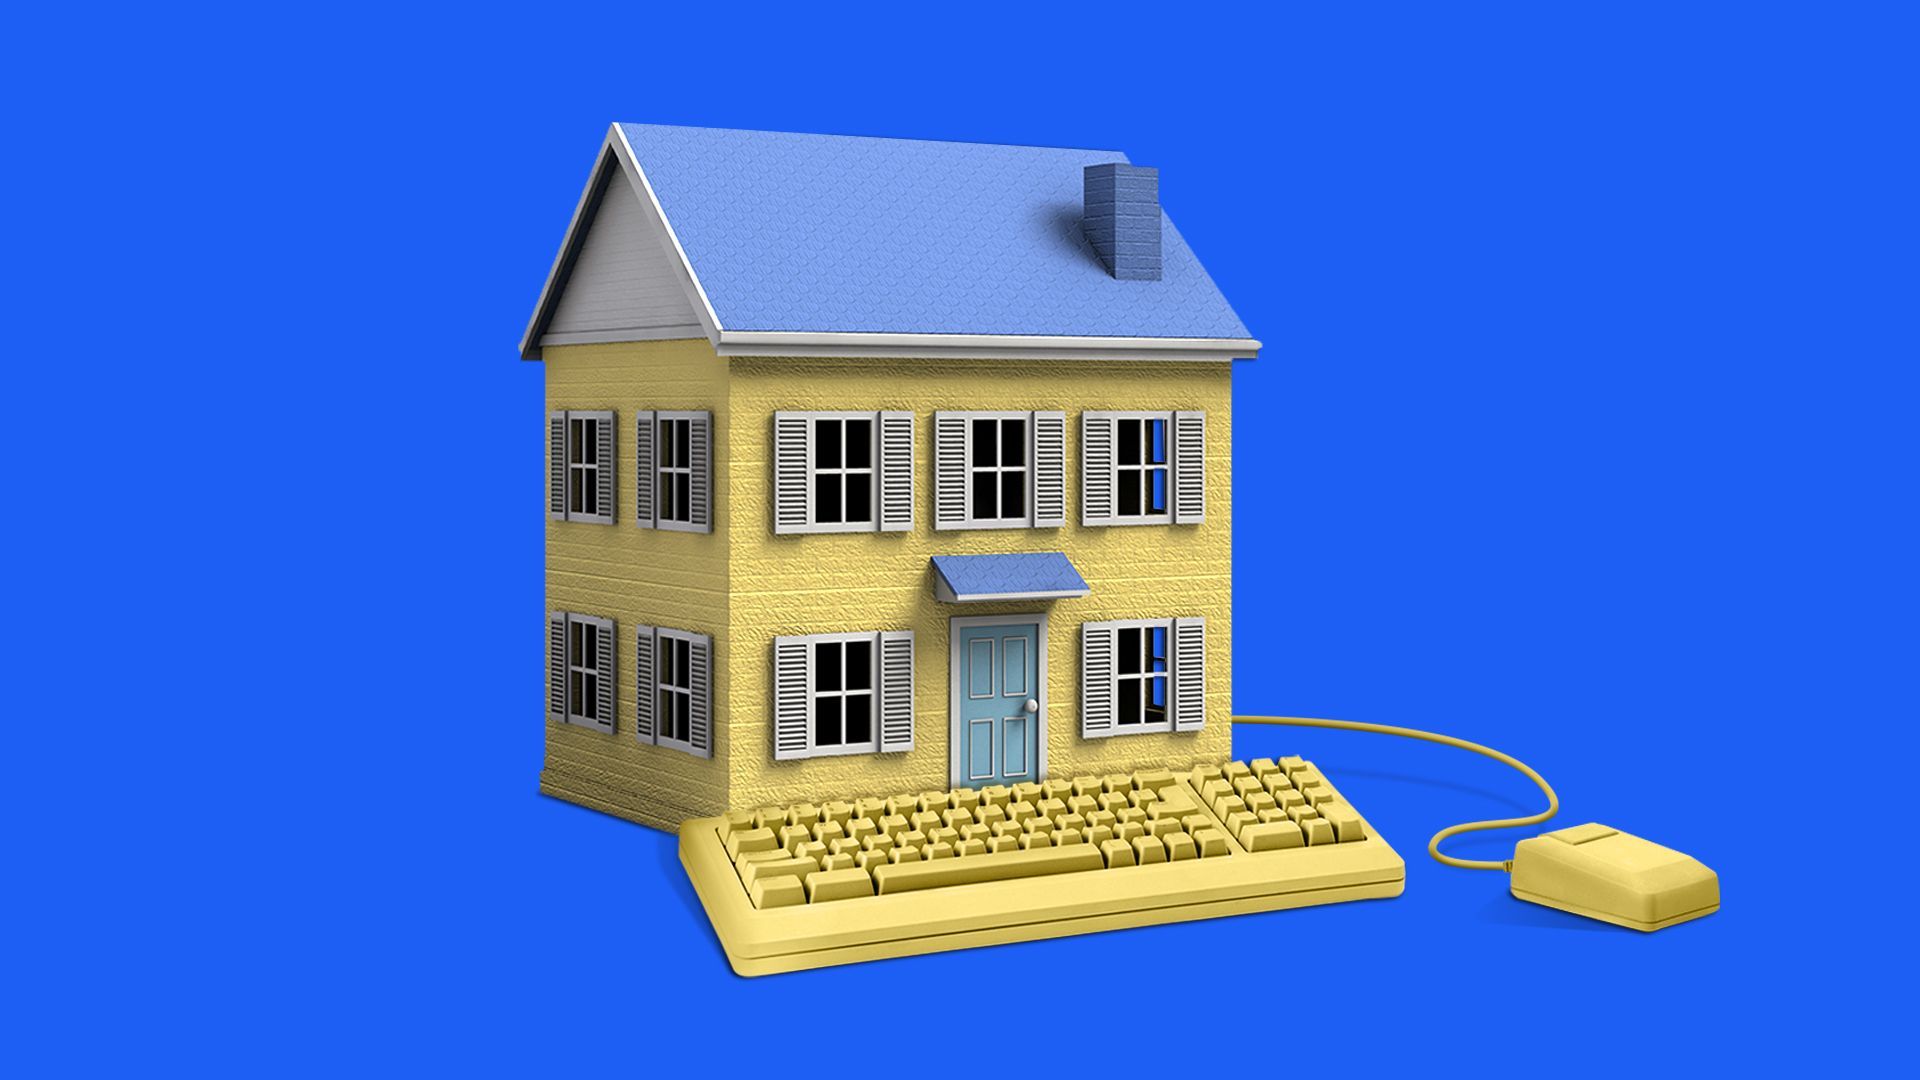 Illustration of a house with a keyboard and mouse